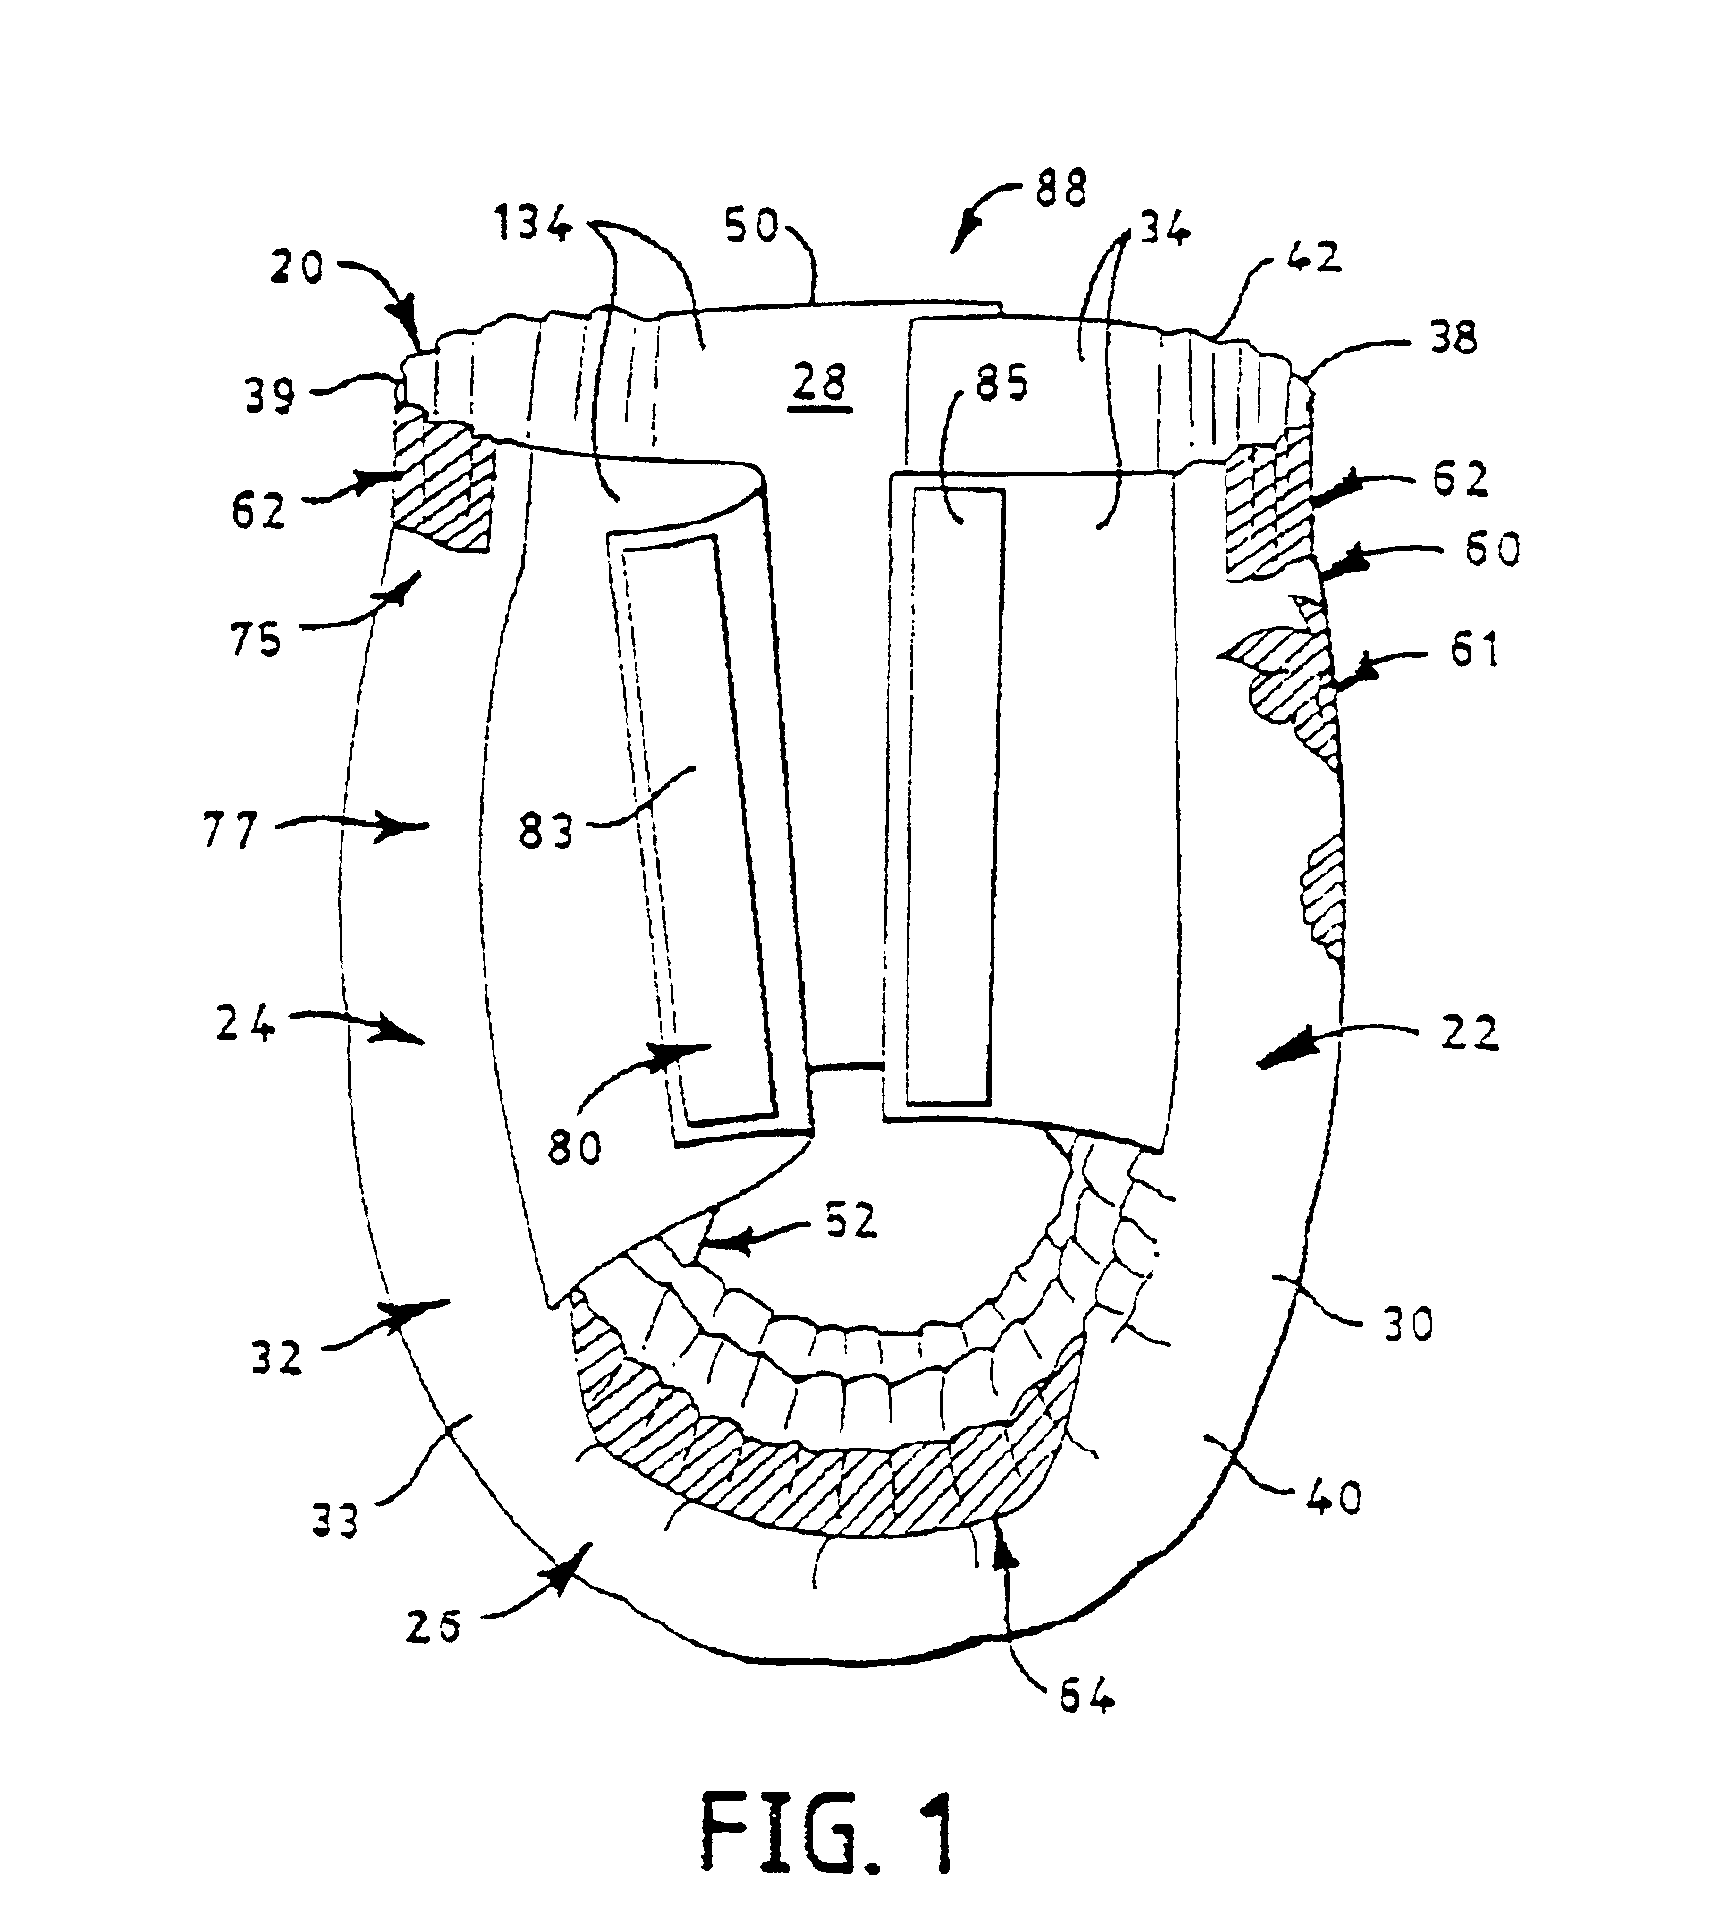 Mechanical fastening system for an absorbent article